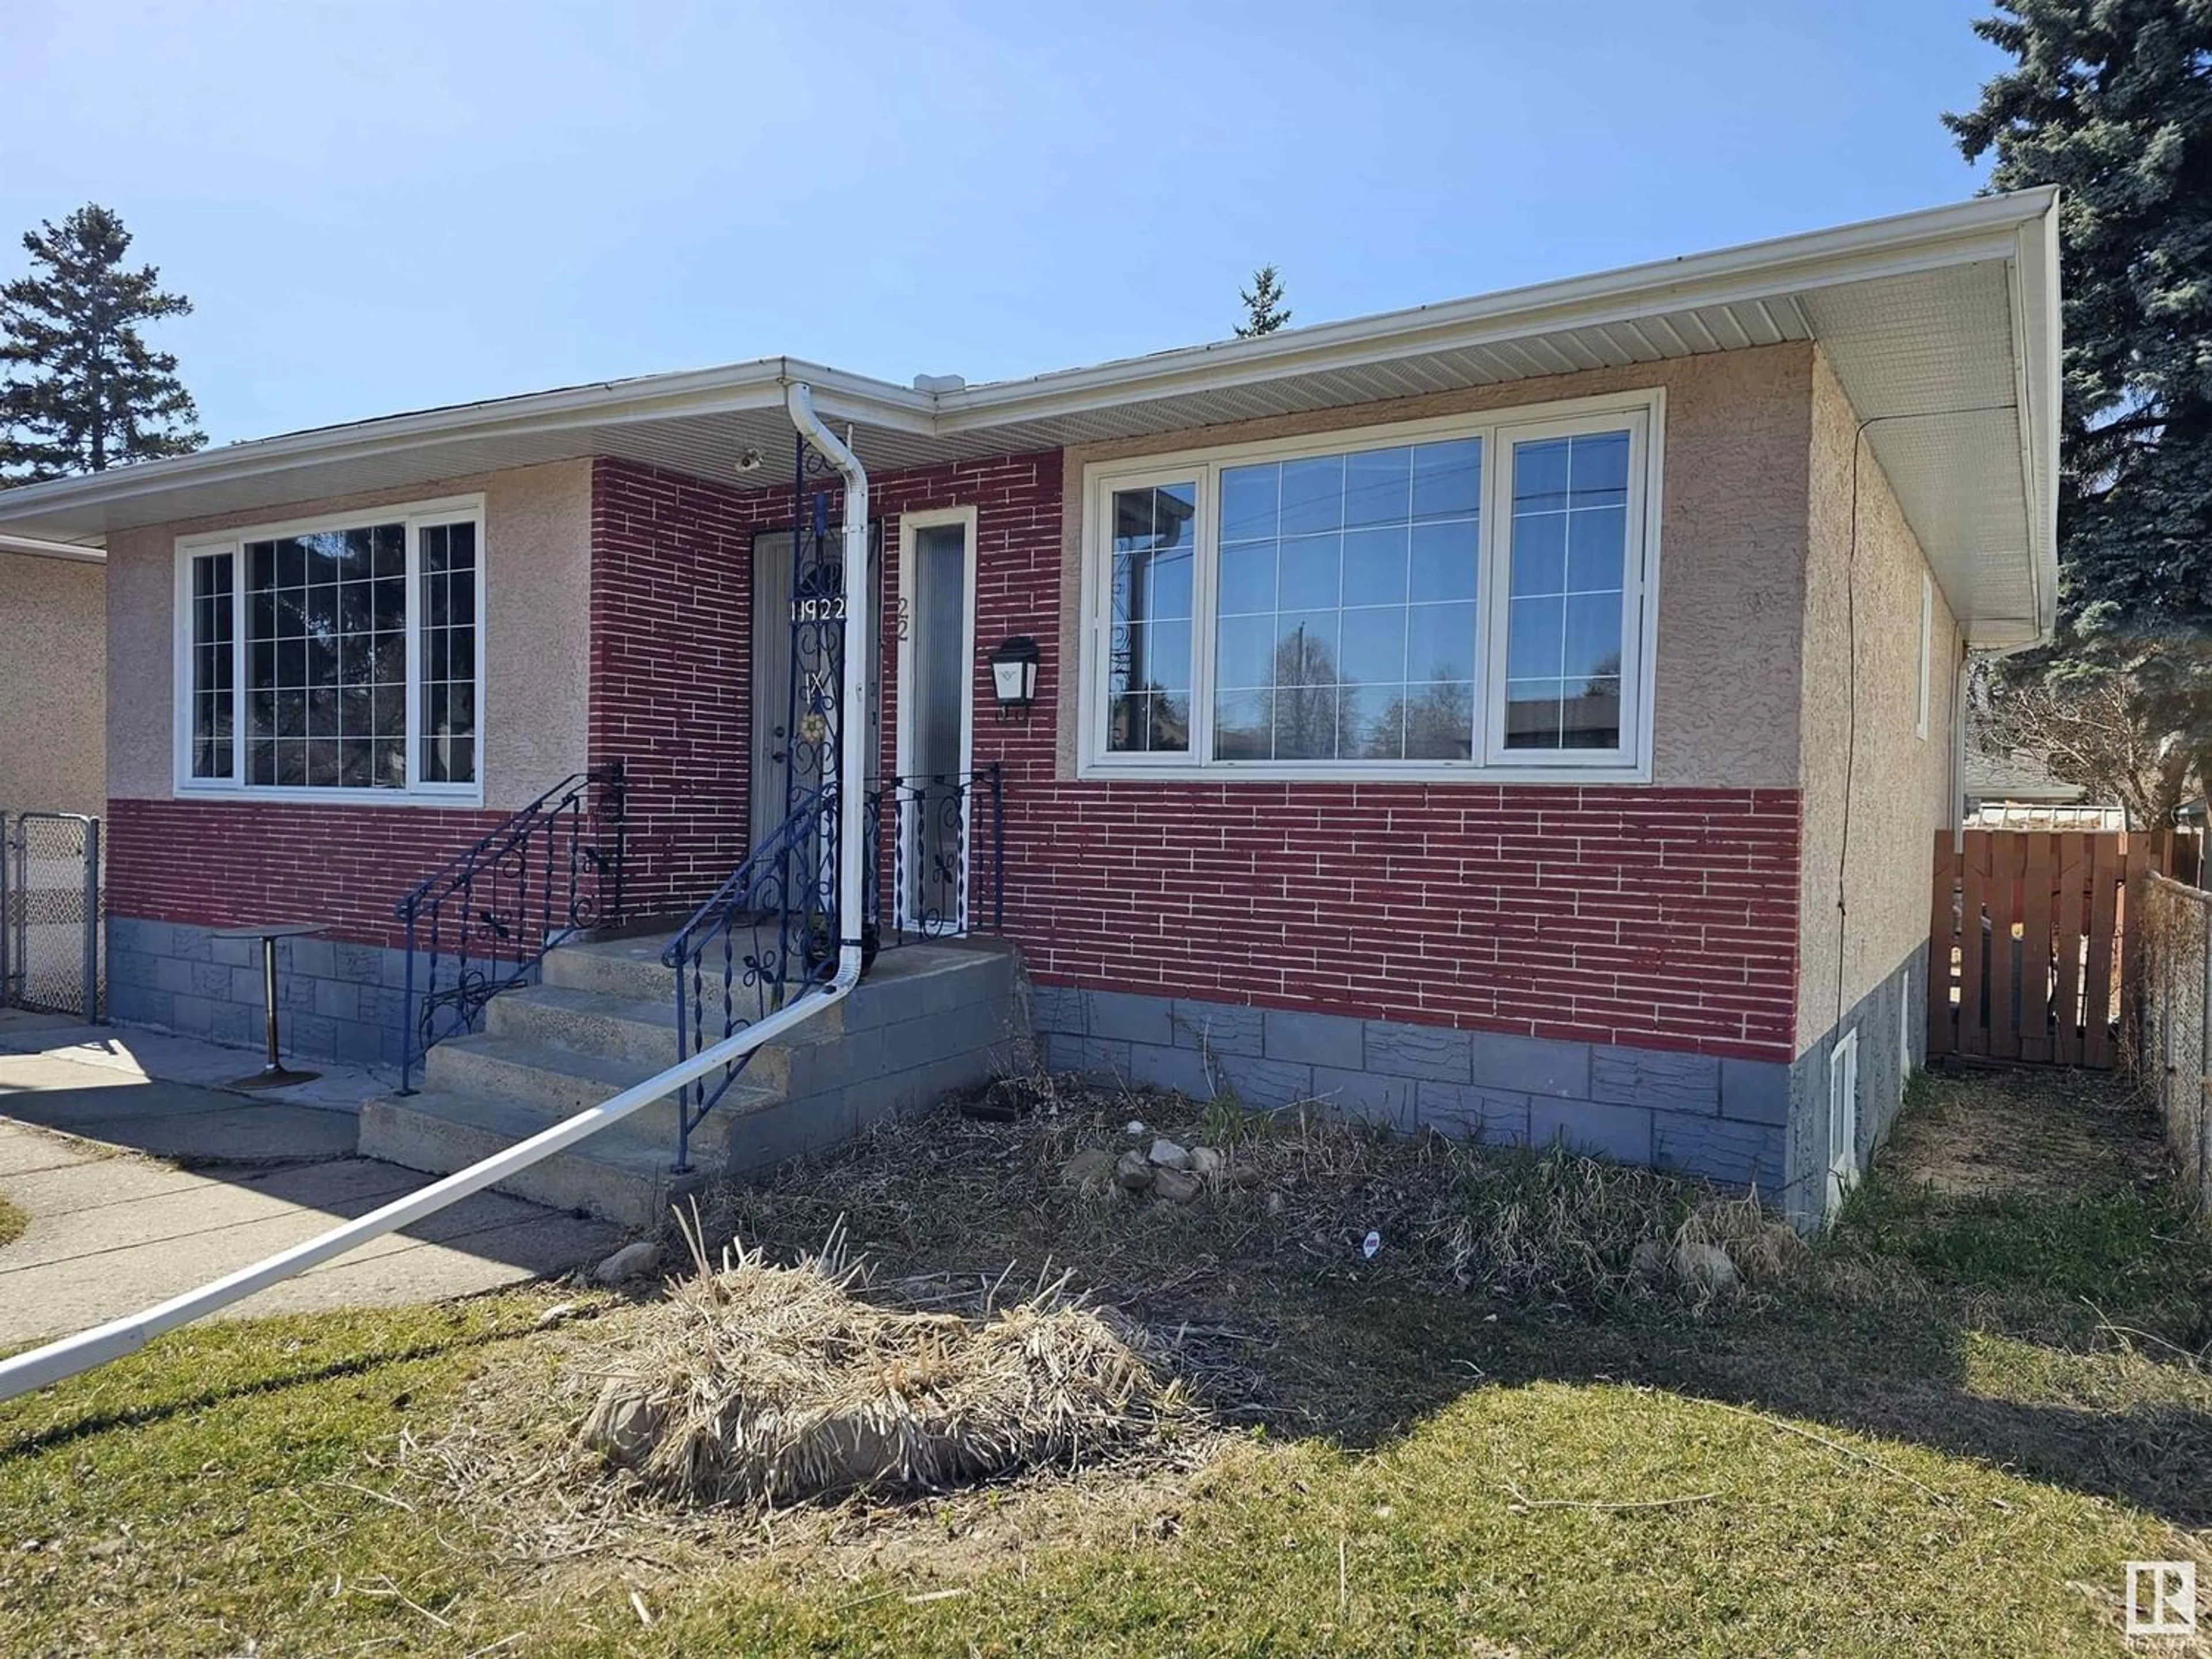 Home with brick exterior material for 11922 50 ST NW, Edmonton Alberta T5W3C2